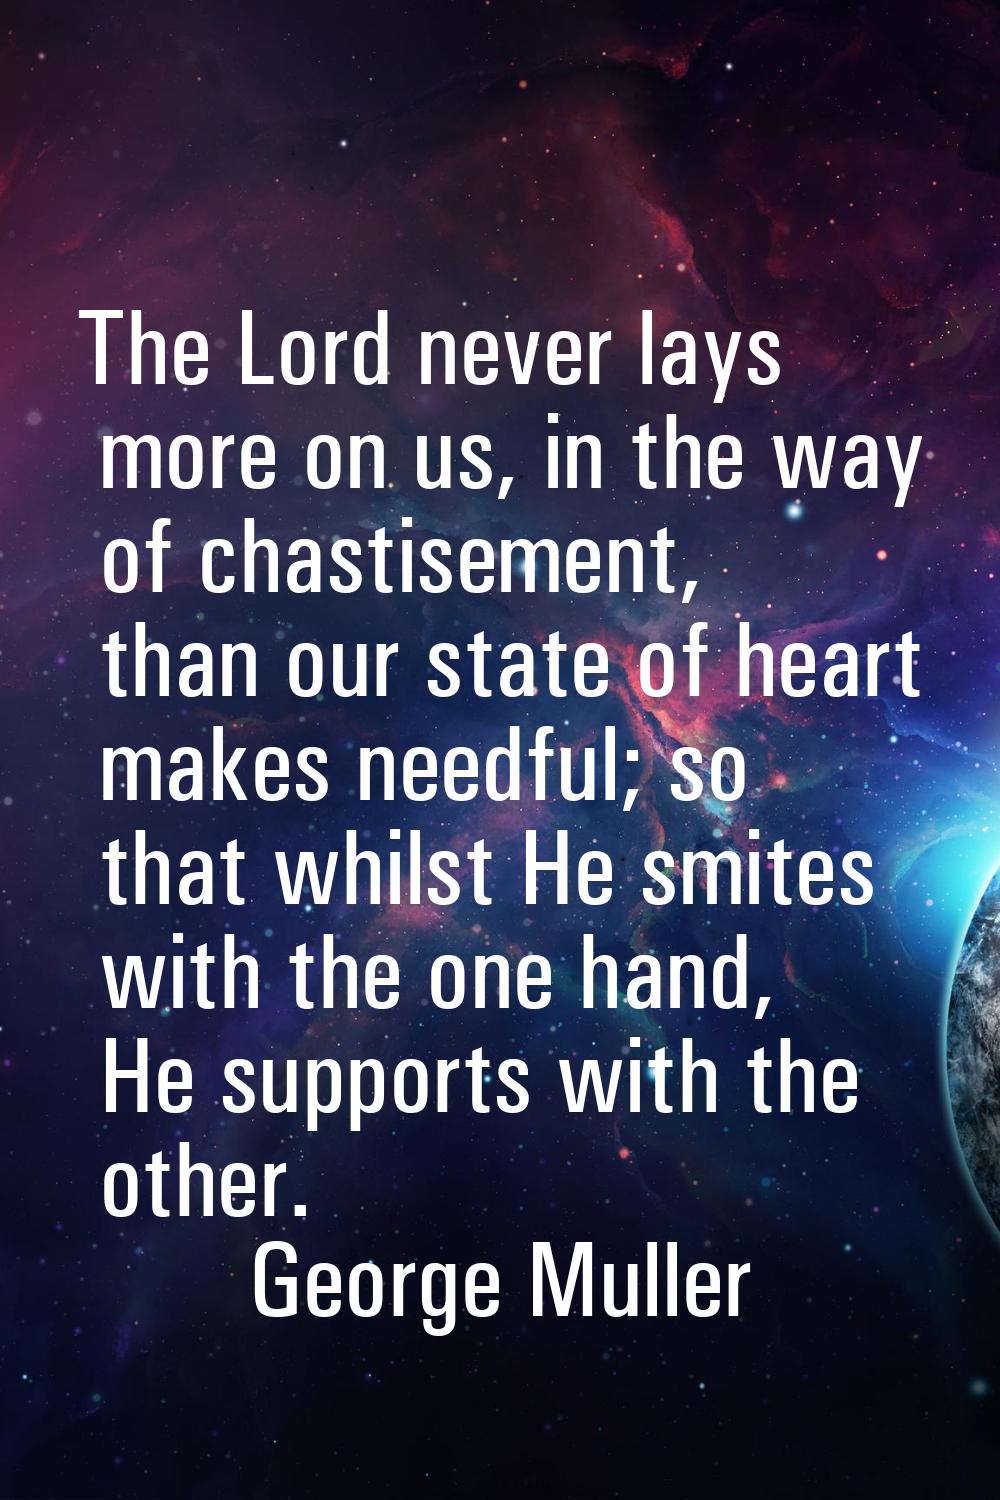 The Lord never lays more on us, in the way of chastisement, than our state of heart makes needful; 